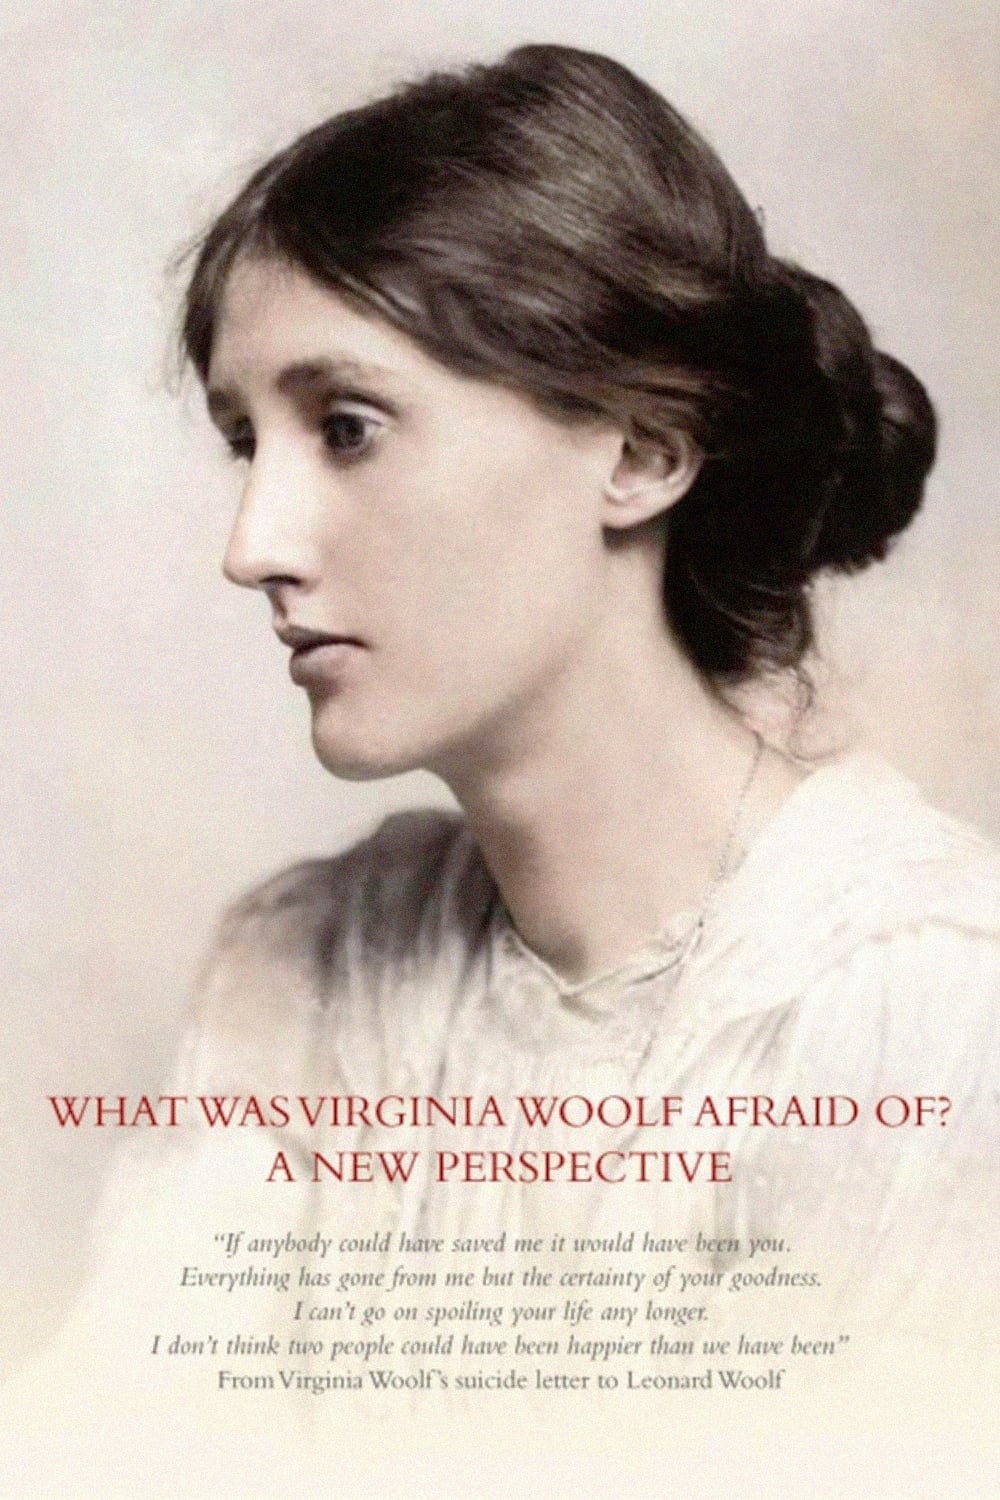 What Was Virginia Woolf Really Afraid of?